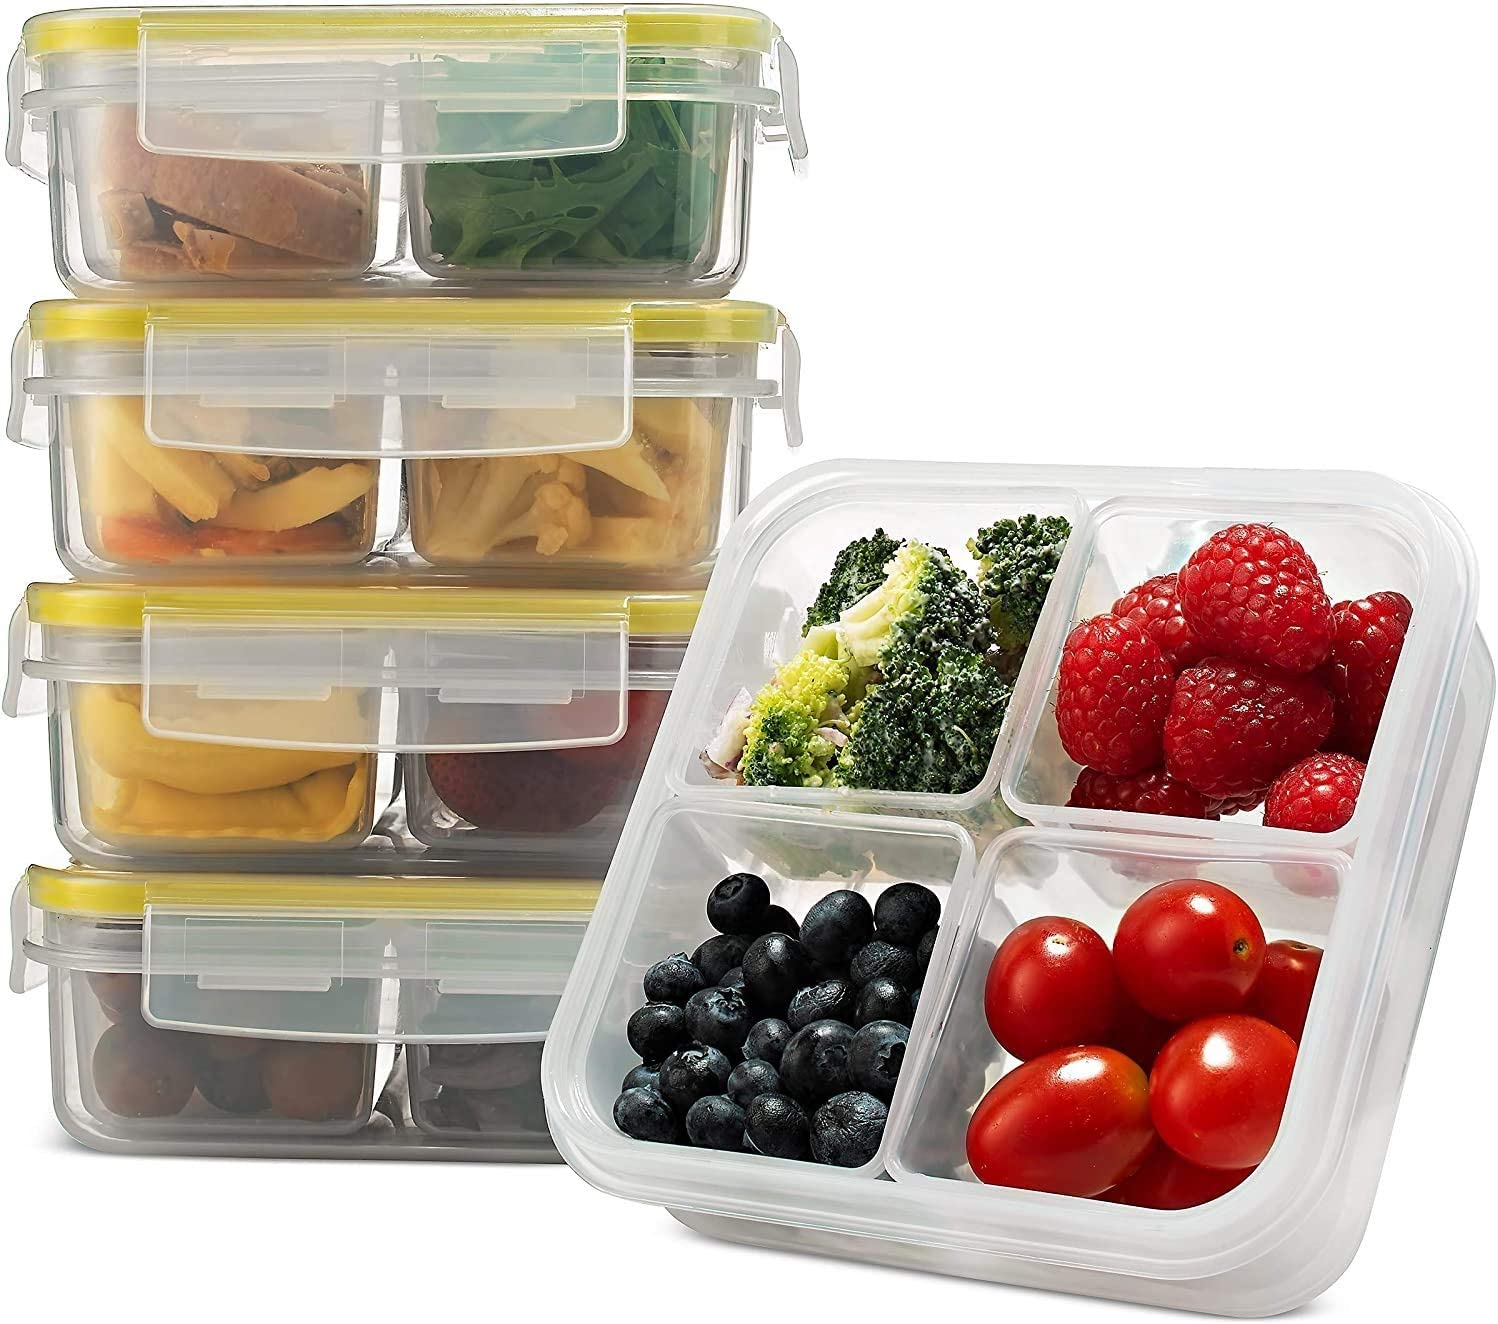 Komax Biokips Square Food Storage Container With Separator, 700 ml - Whole and All